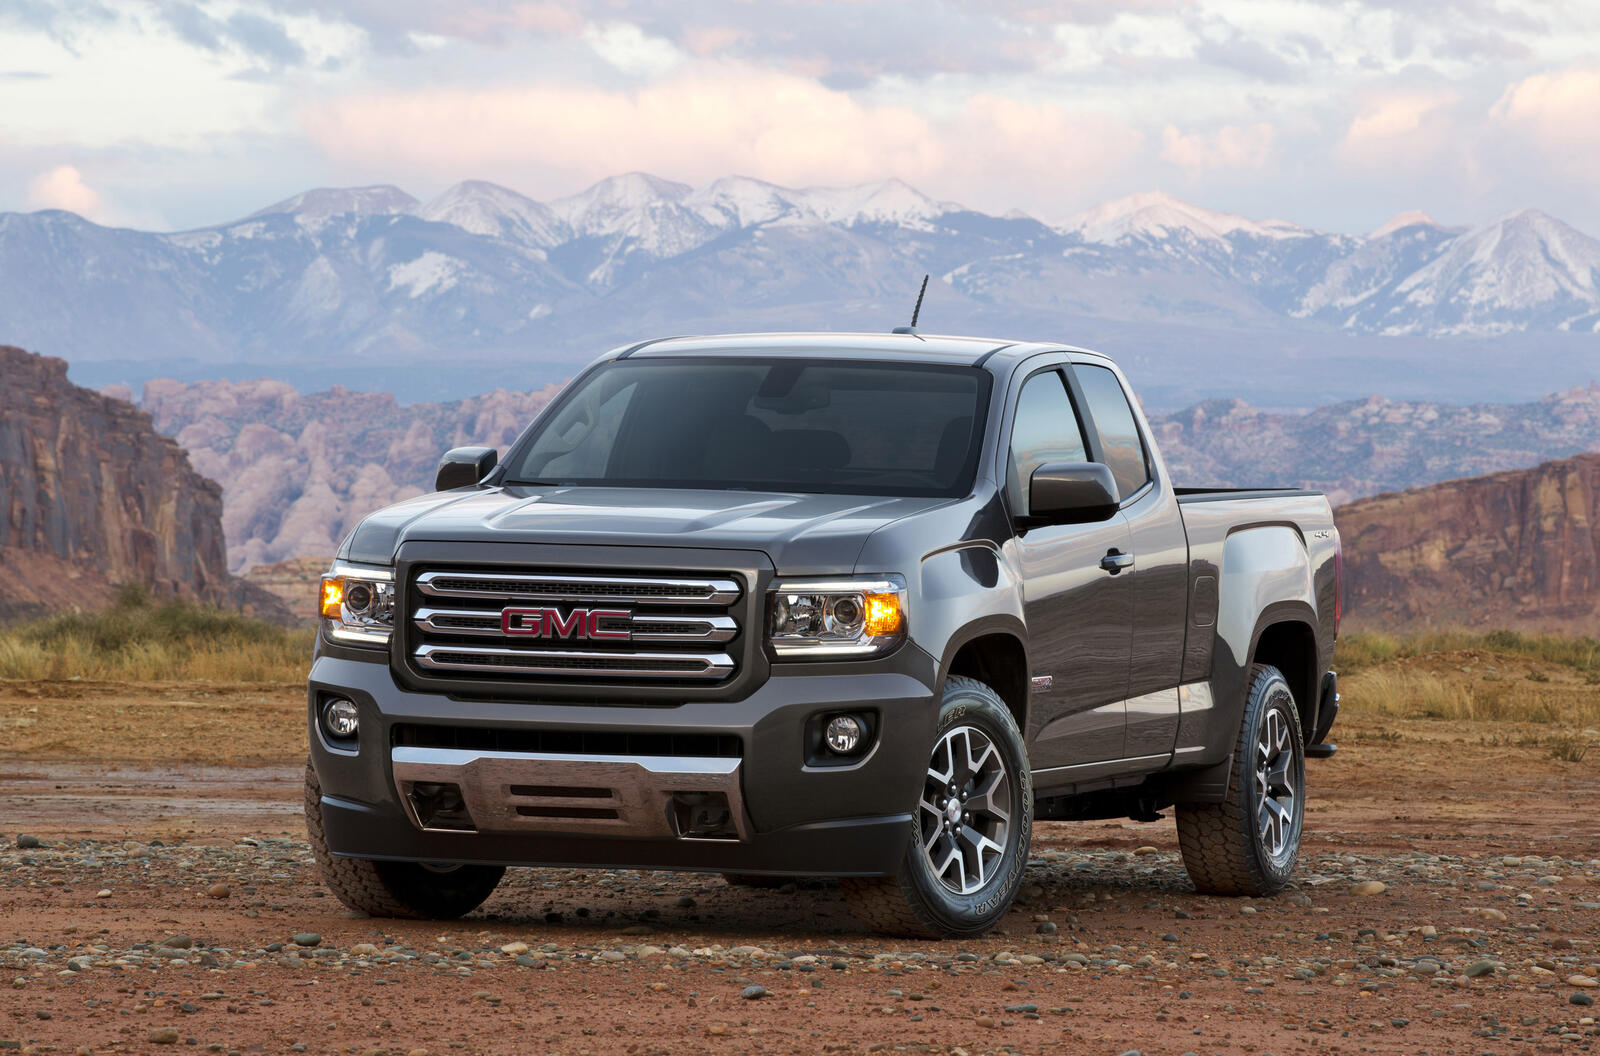 Wallpapers GMC canyon Jeep on the desktop